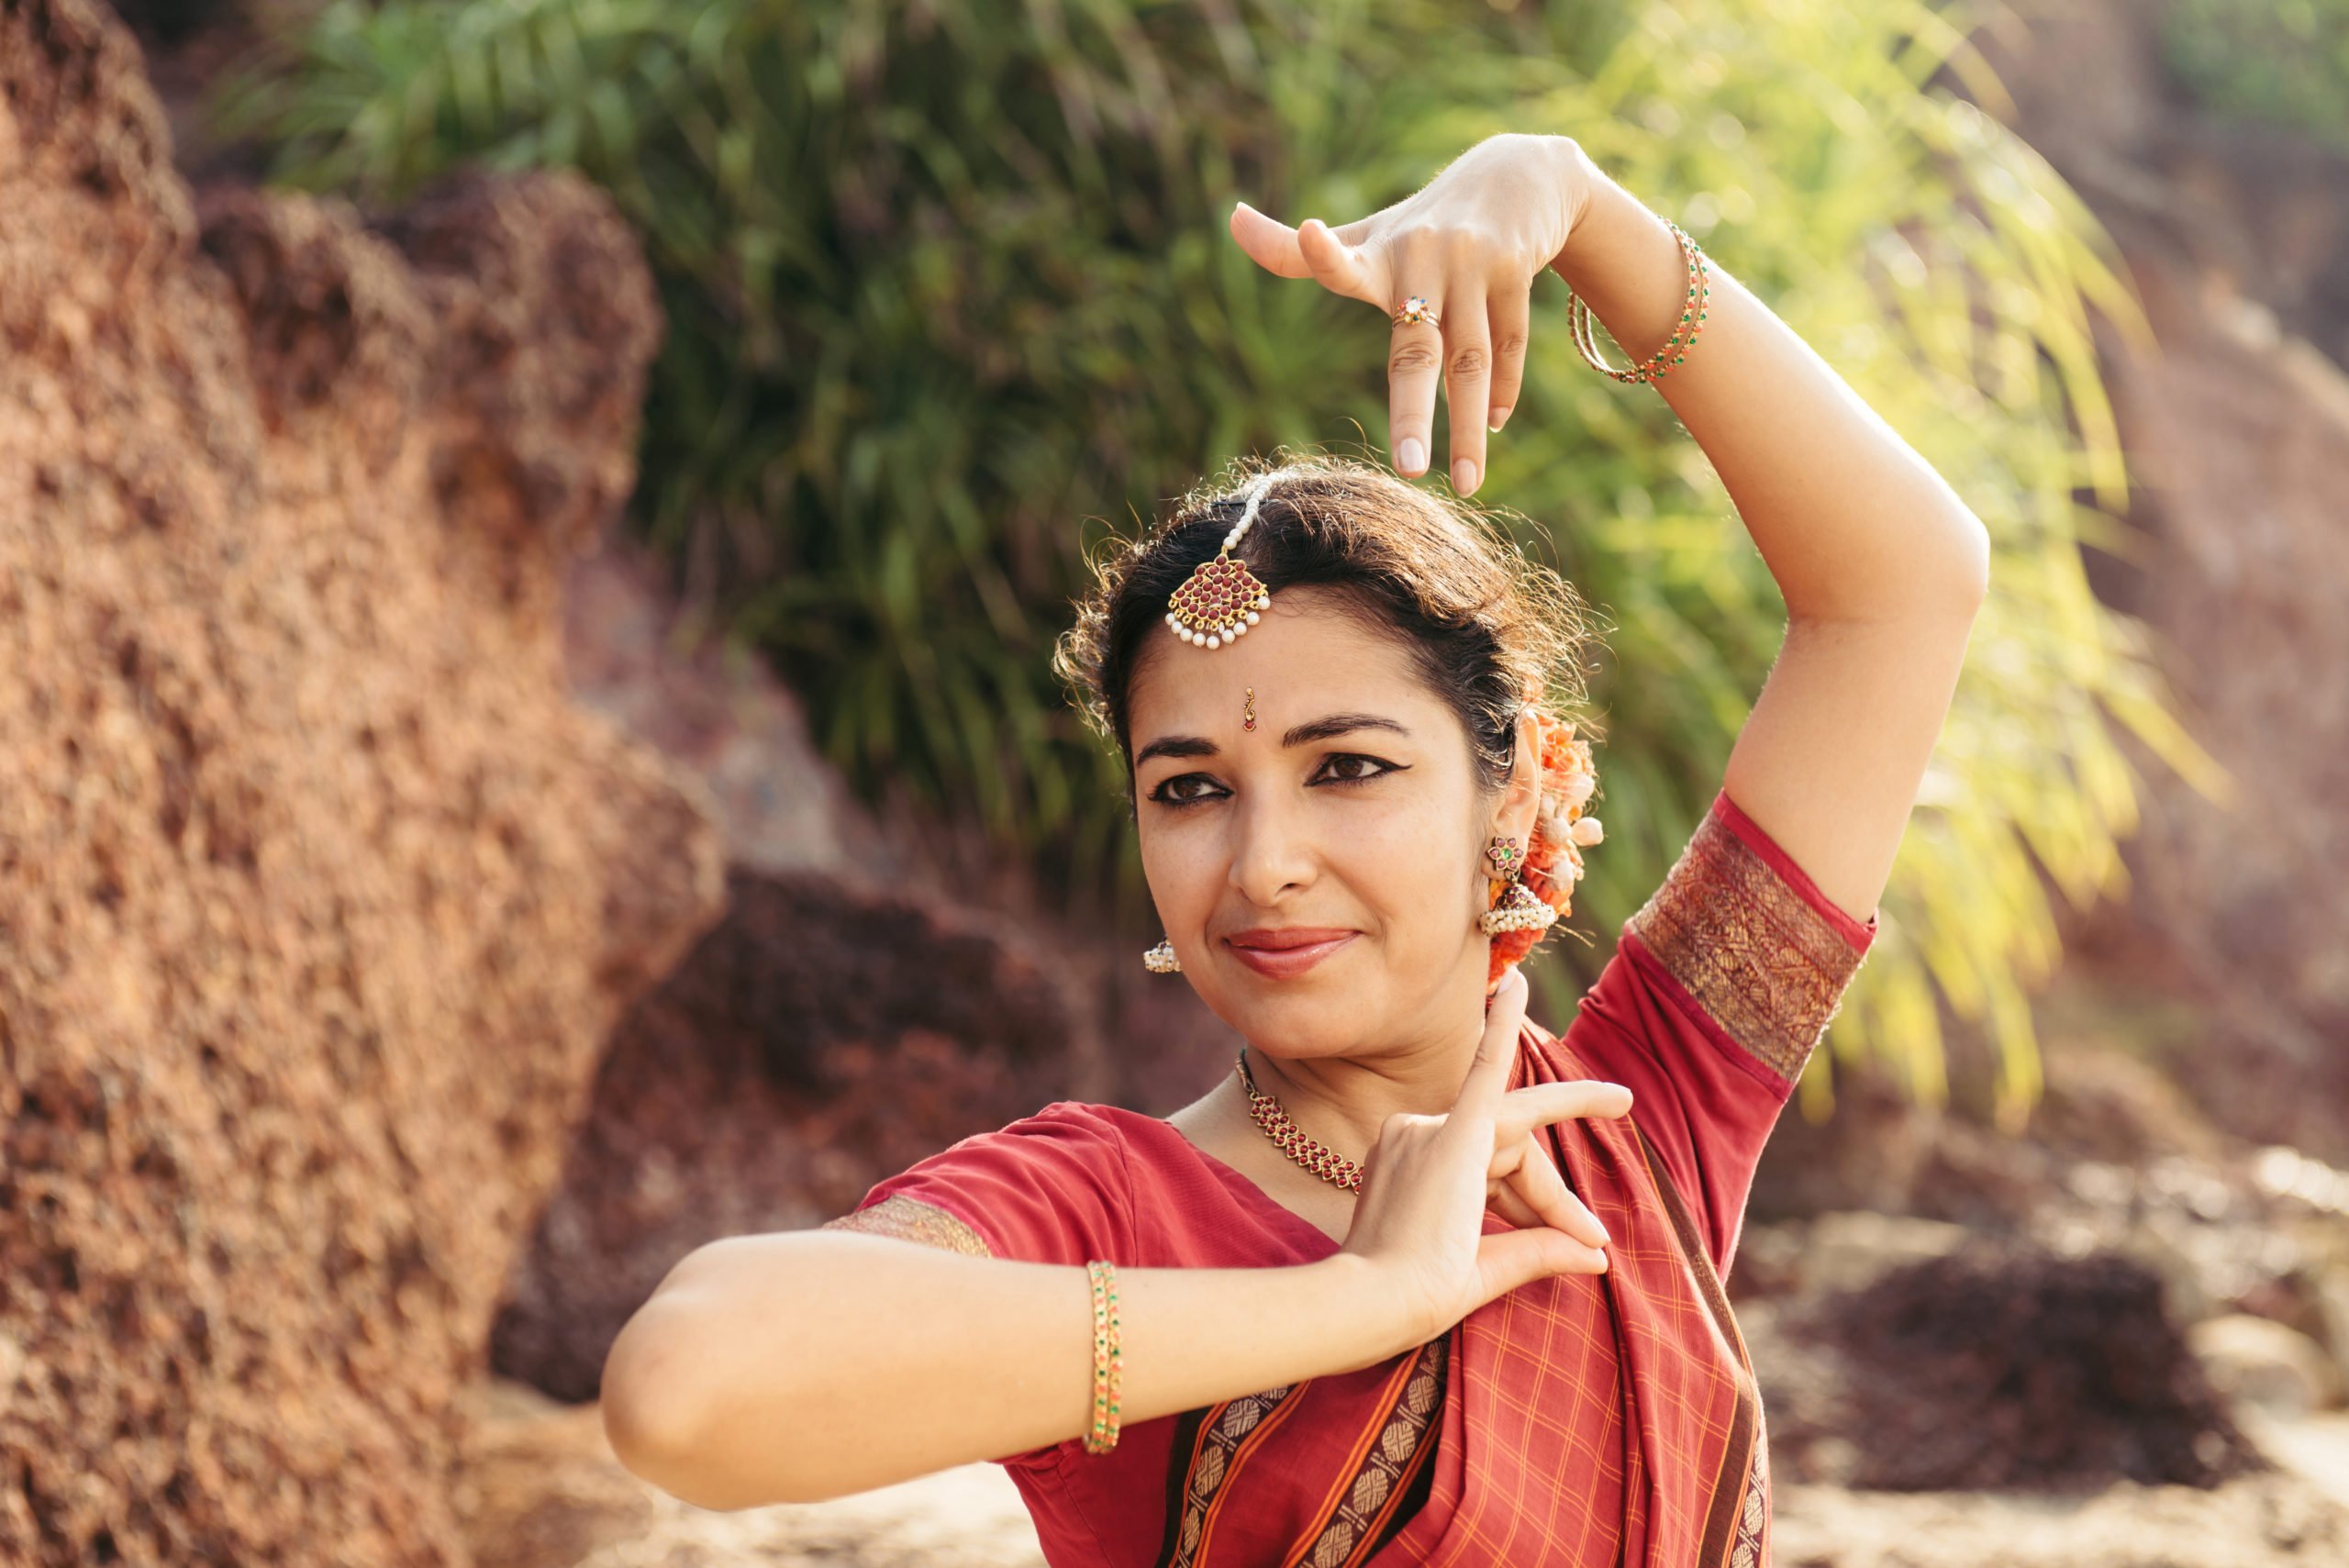 Absorb The Mythology Of The Bharatnatyam Dance During Our Bharatnatyam Dance Experience In Chennai